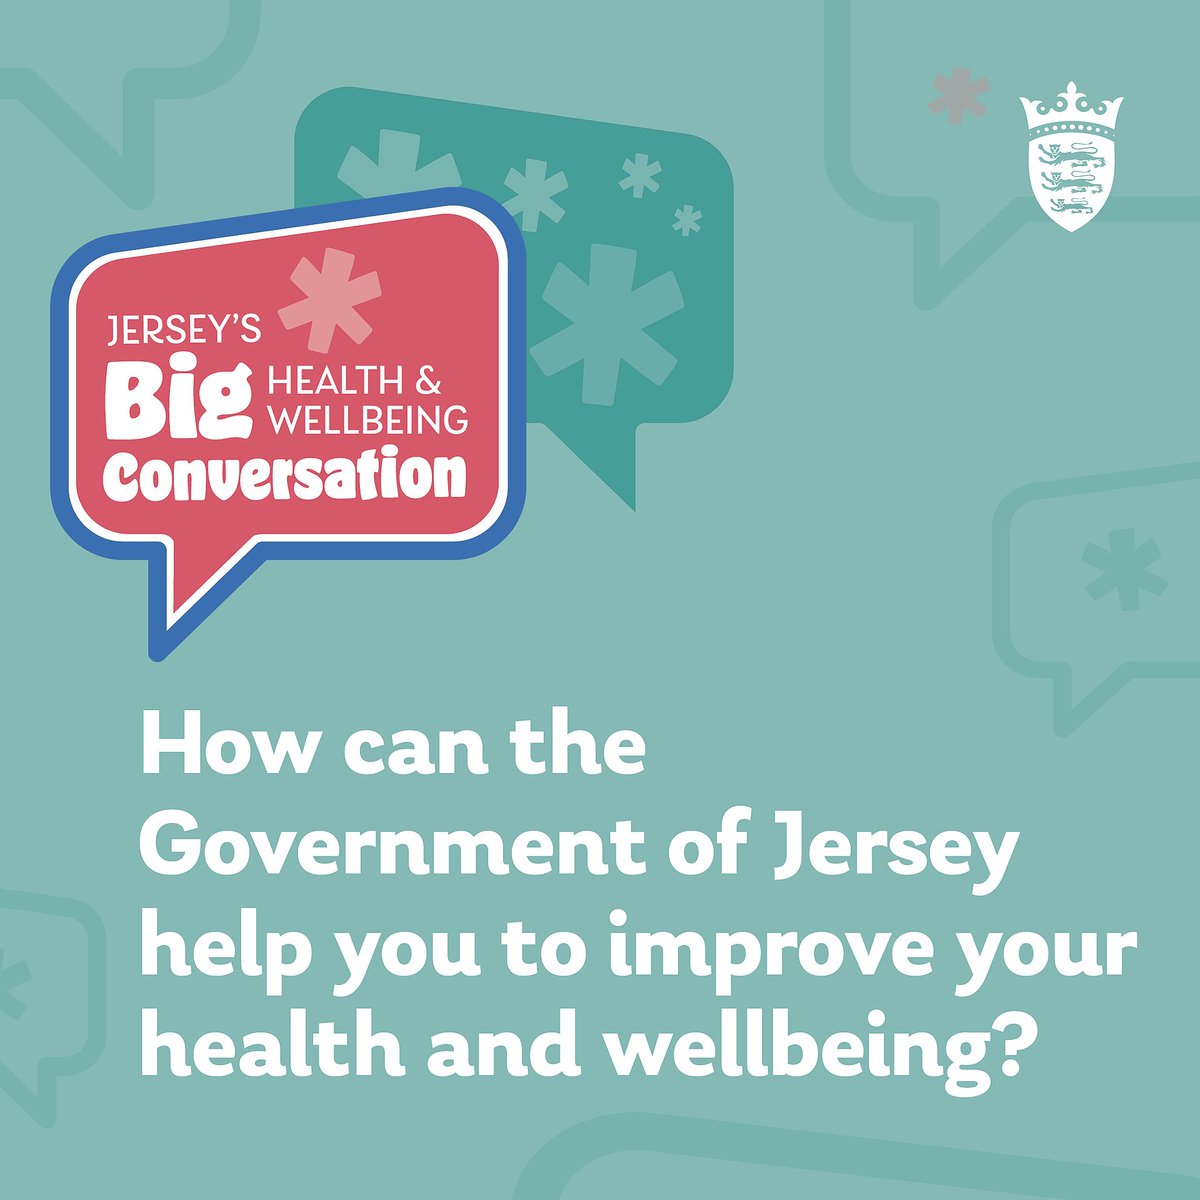 Today is the last day to have your say on how we can help protect and improve mental health and wellbeing on the island.  Visit, gov.je/healthconversa… to submit your comments on how the government can understand Islander’s views on what works to improve health and wellbeing.